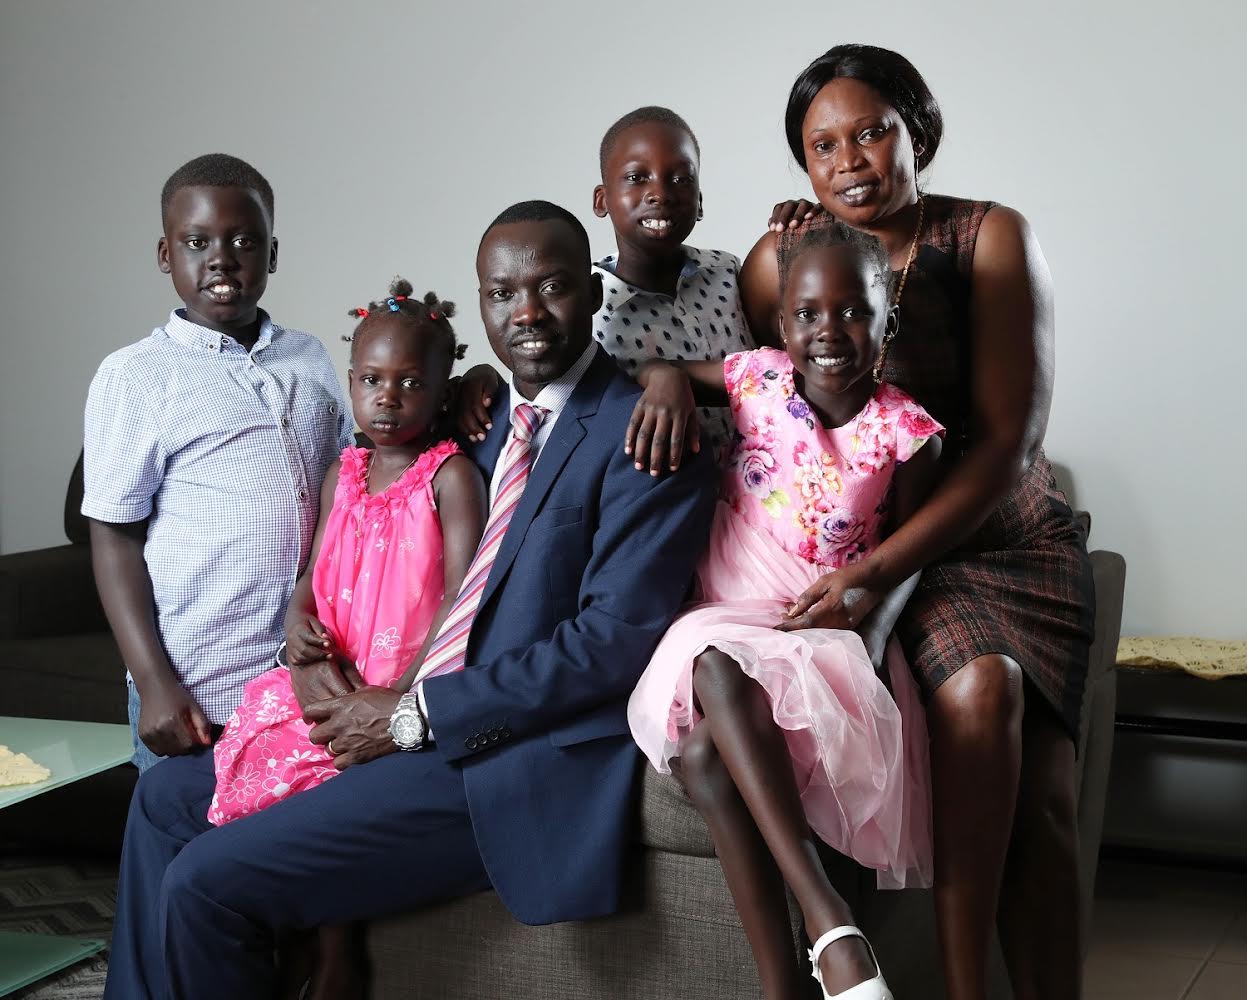 Elijah Buol, his wife Ashol and their children